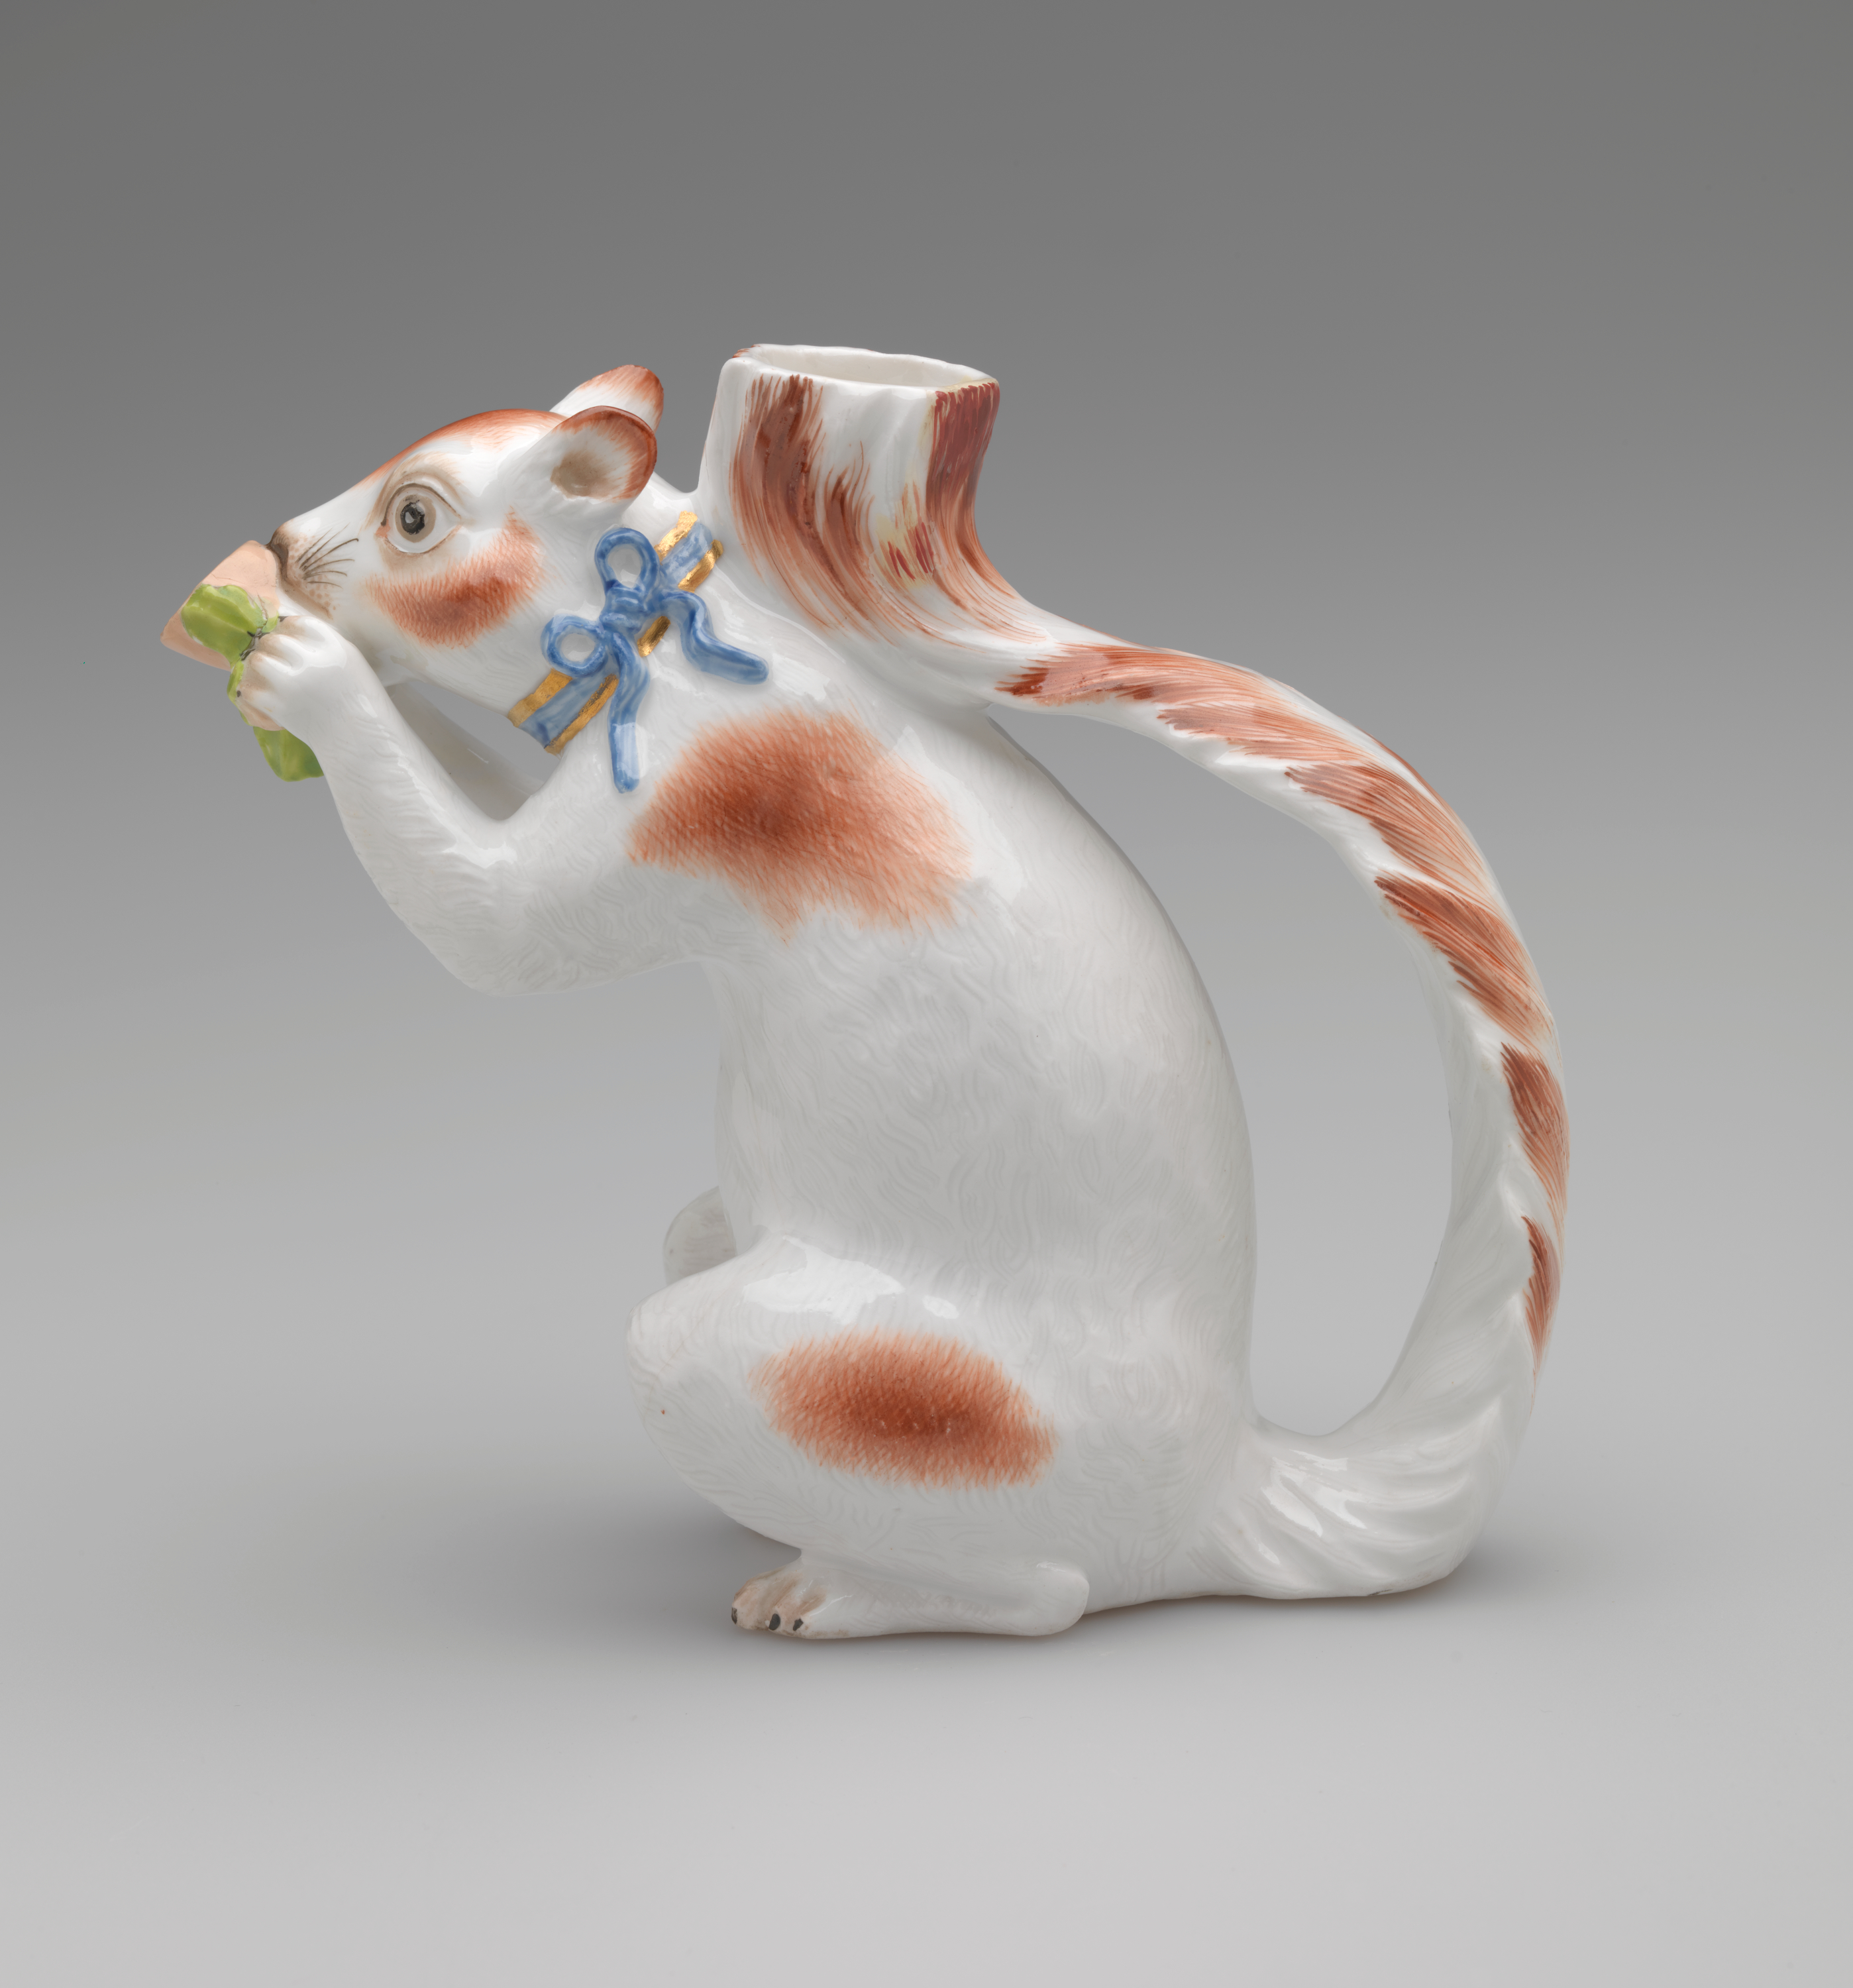 /Vessel%20in%20the%20shape%20of%20a%20white%20squirrel%20with%20brown%20patches%20and%20a%20blue%20ribbon%20arounds%20its%20neck.%20It%20holds%20a%20brown%20nut%20with%20green%20leaves%20up%20to%20its%20face.